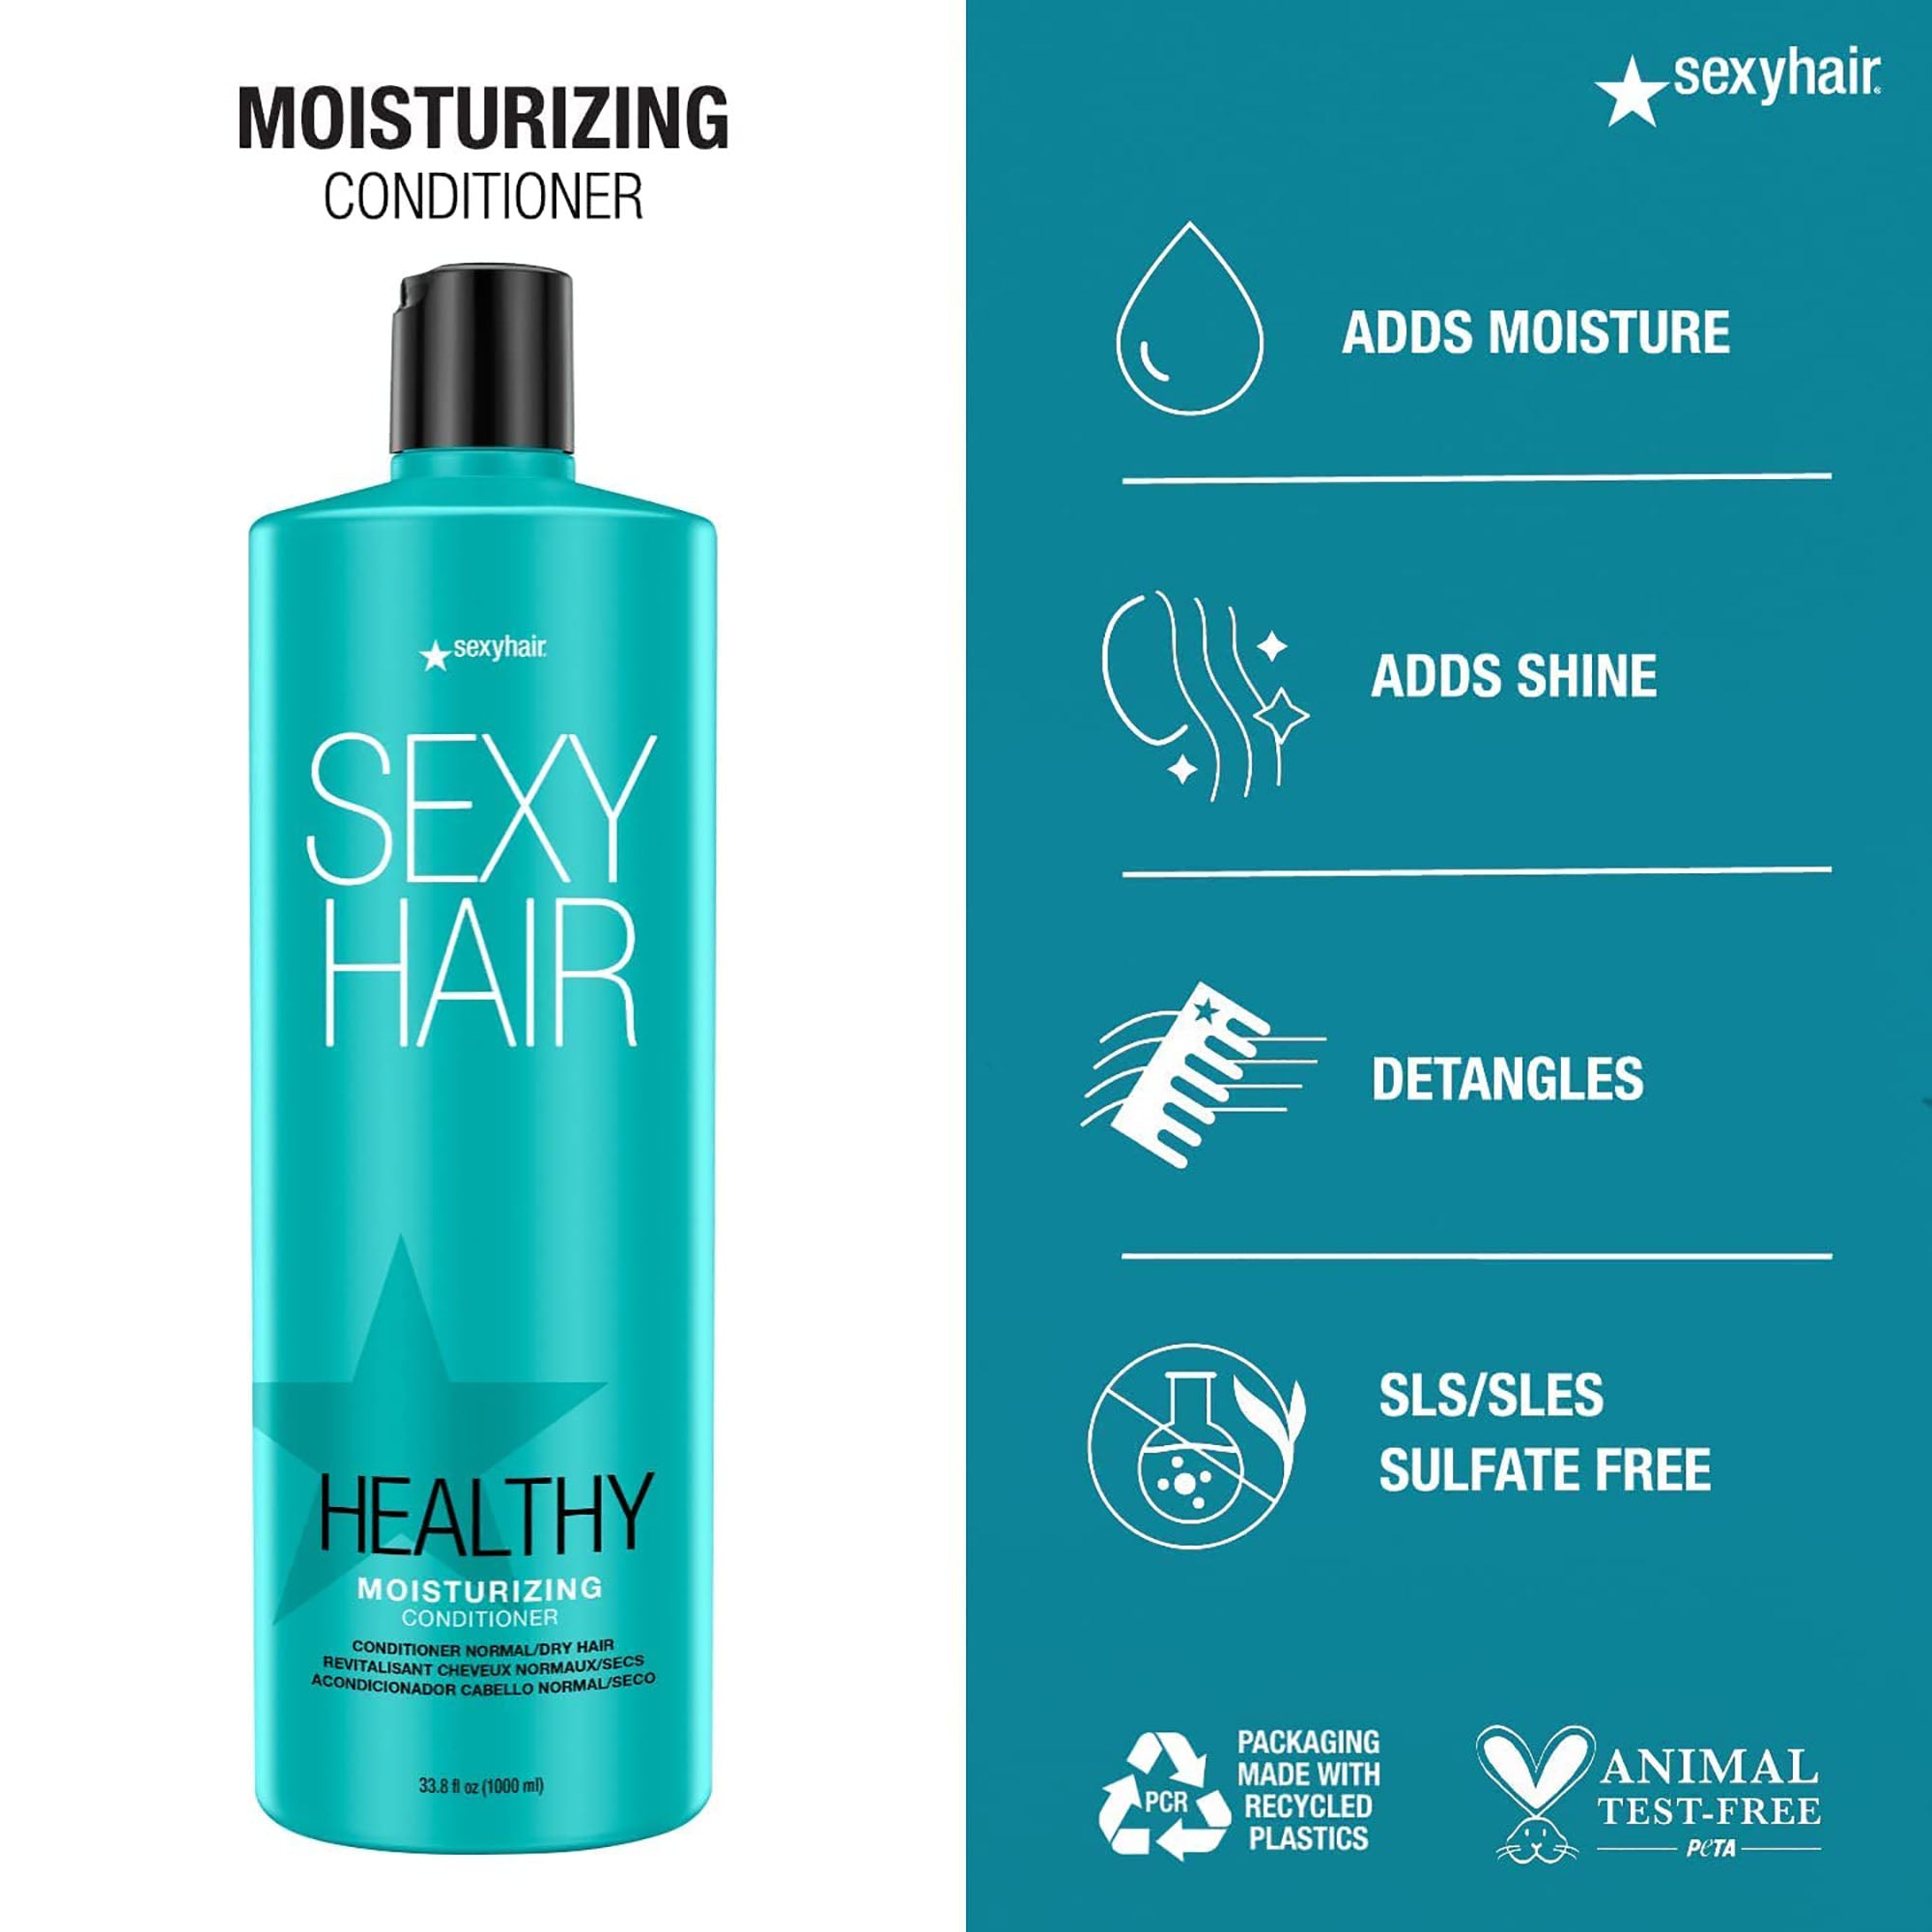 Sexy Hair Healthy SexyHair Moisturizing Shampoo and Conditioner Liter Duo ($65 Value) / 33.OZ